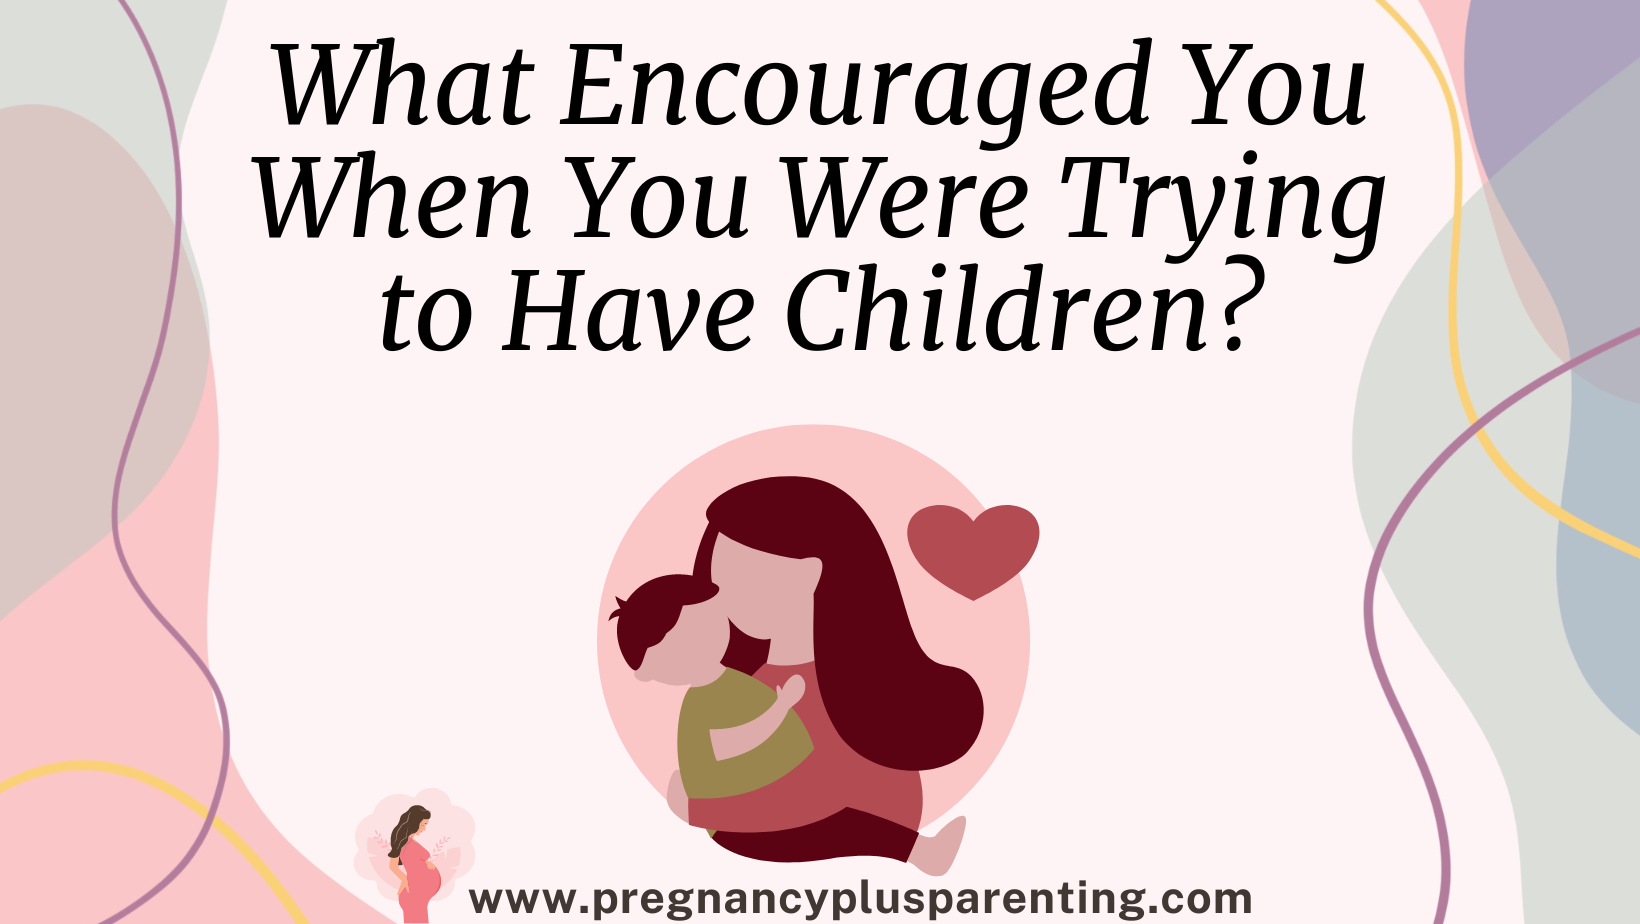 What Encouraged You When You Were Trying to Have Children?